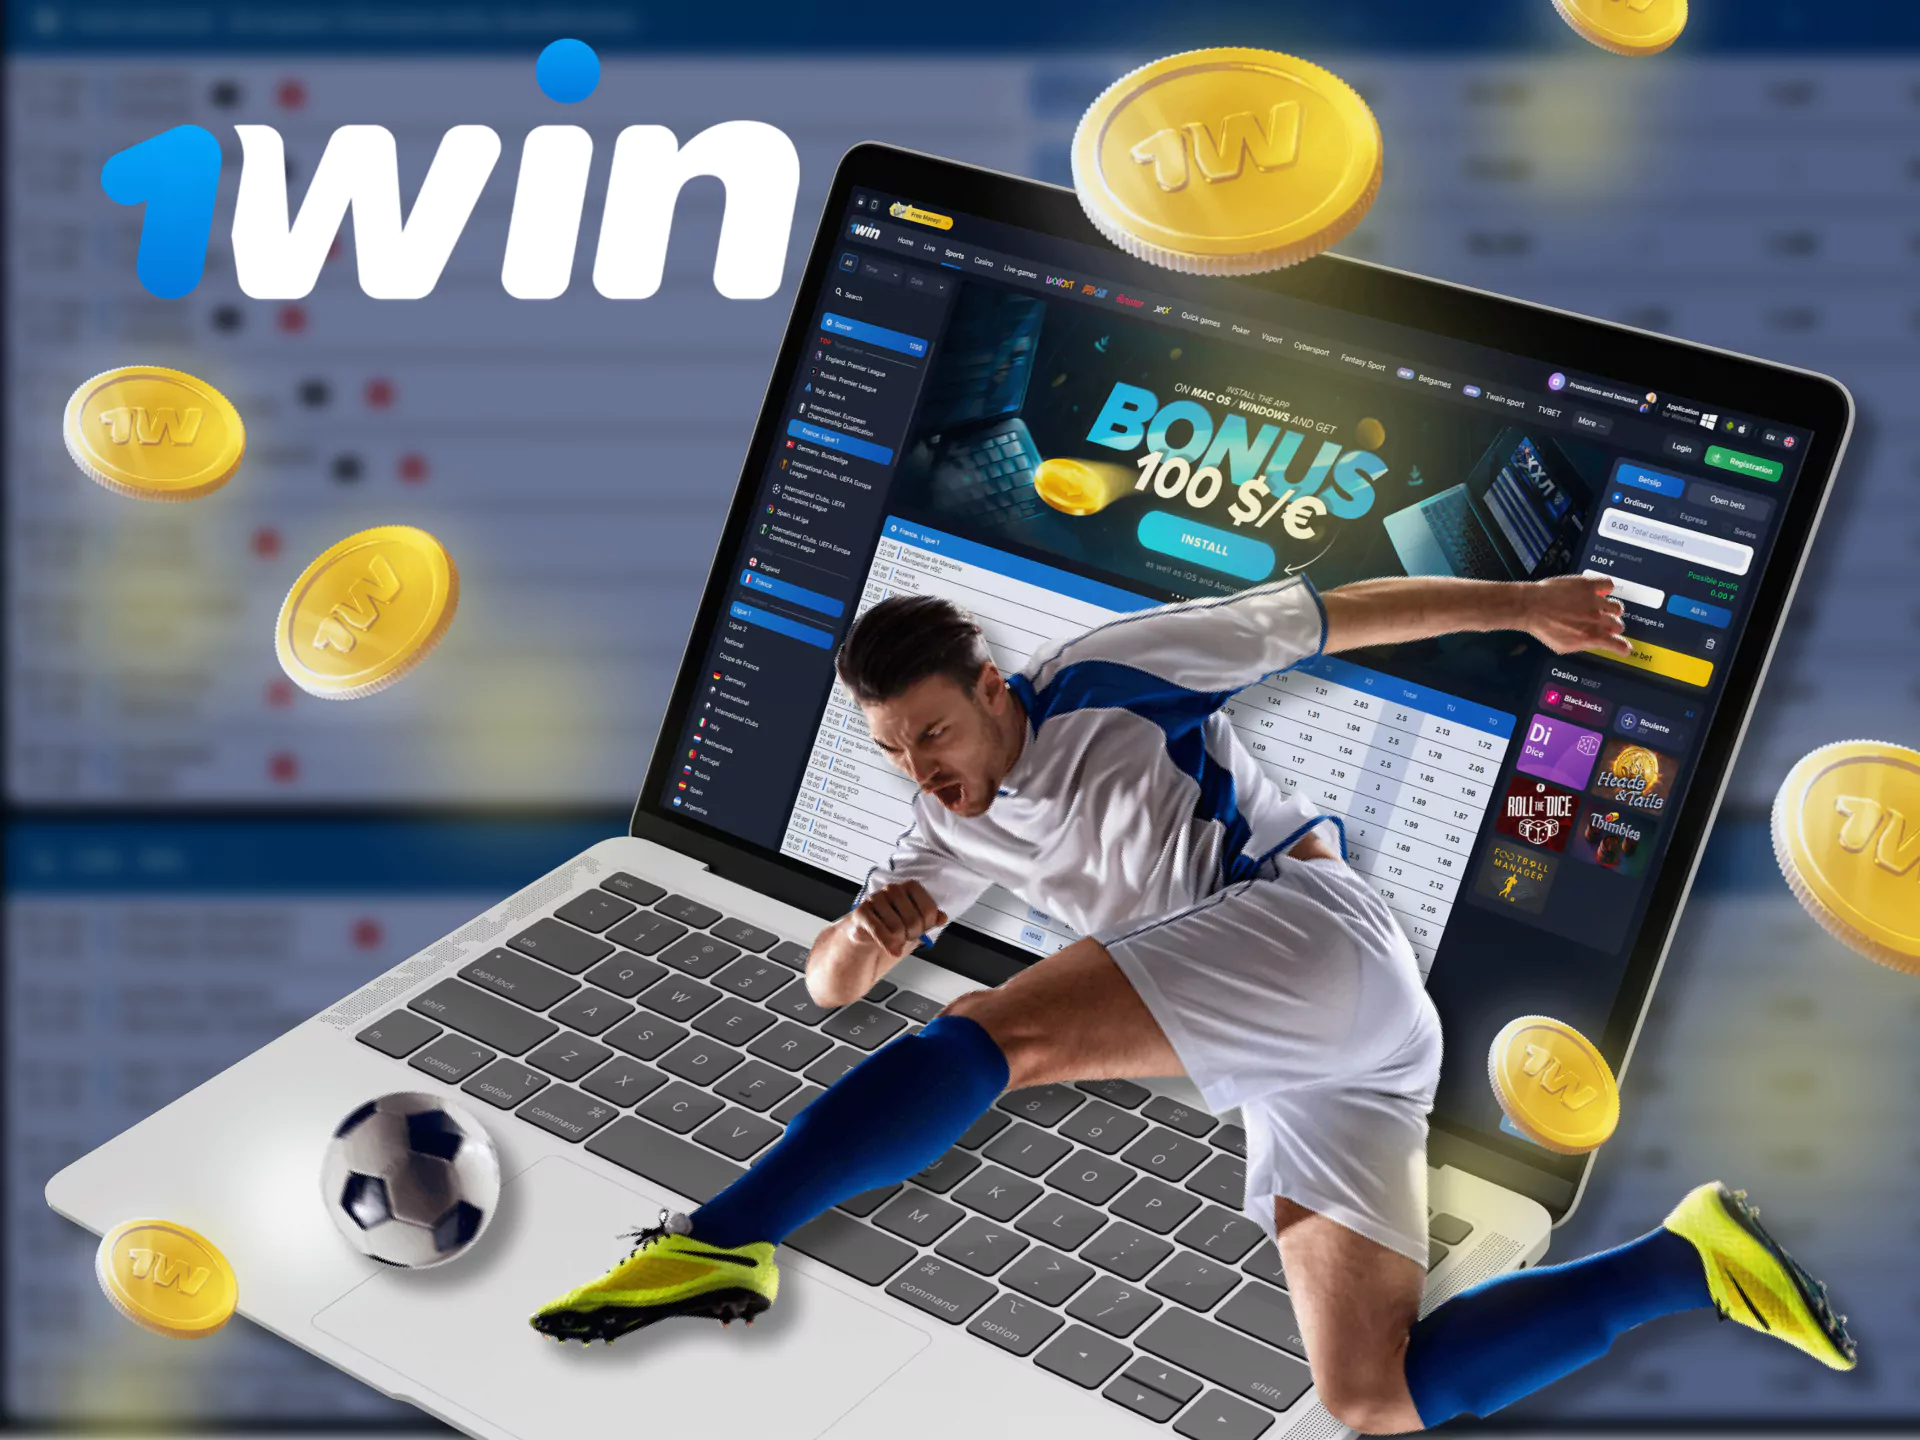 Start betting on football at 1win easily with these instructions.